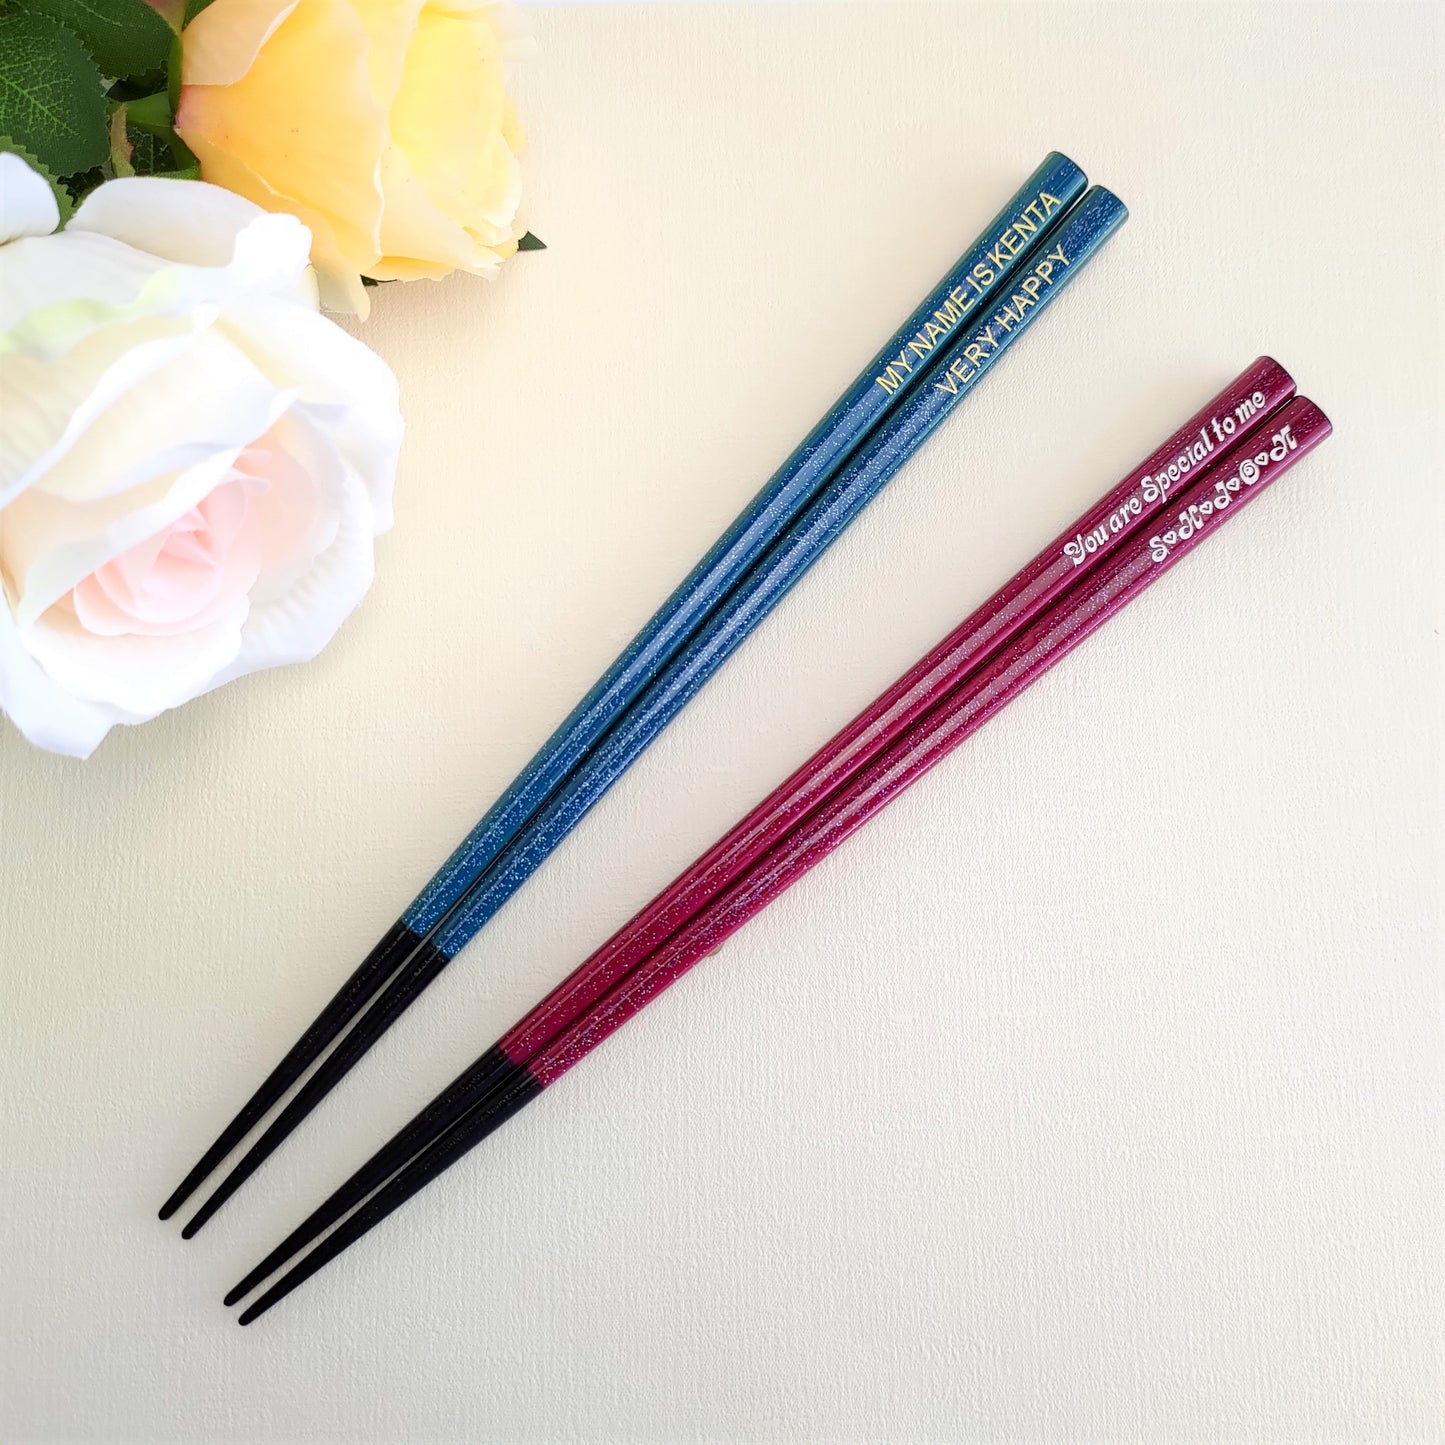 Shiny stars Japanese chopsticks blue red purple - DOUBLE PAIR WITH ENGRAVED WOODEN BOX SET